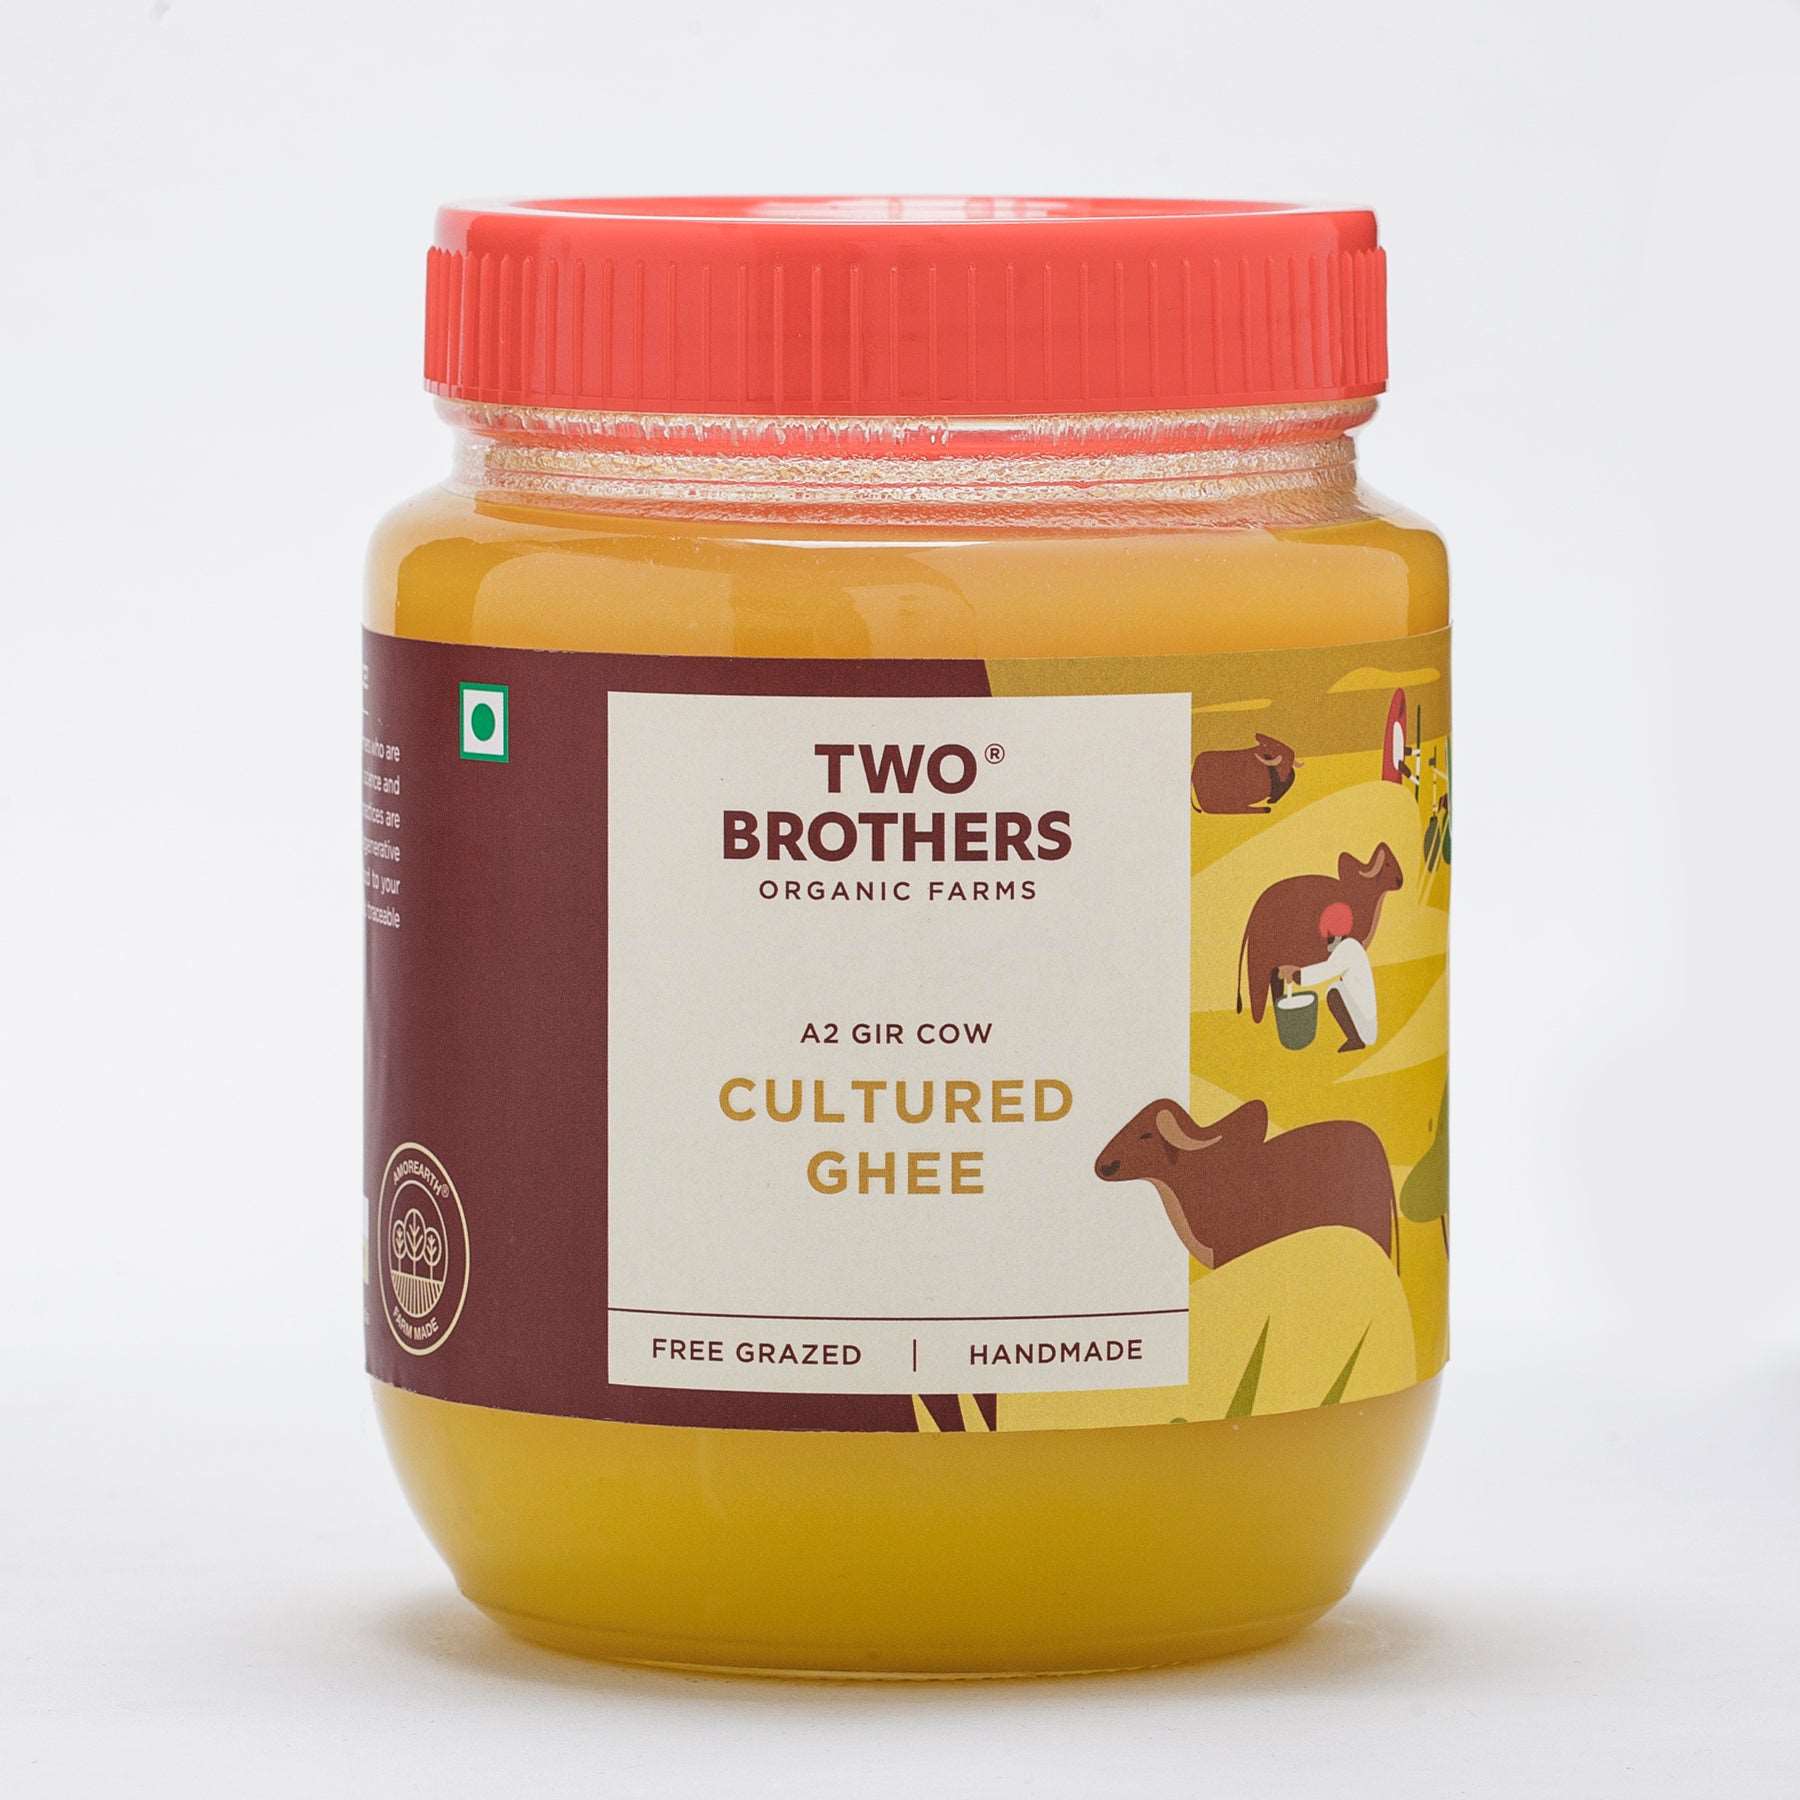 Pure Indian Foods Cultured Ghee - Organic (Grassfed) on sale at